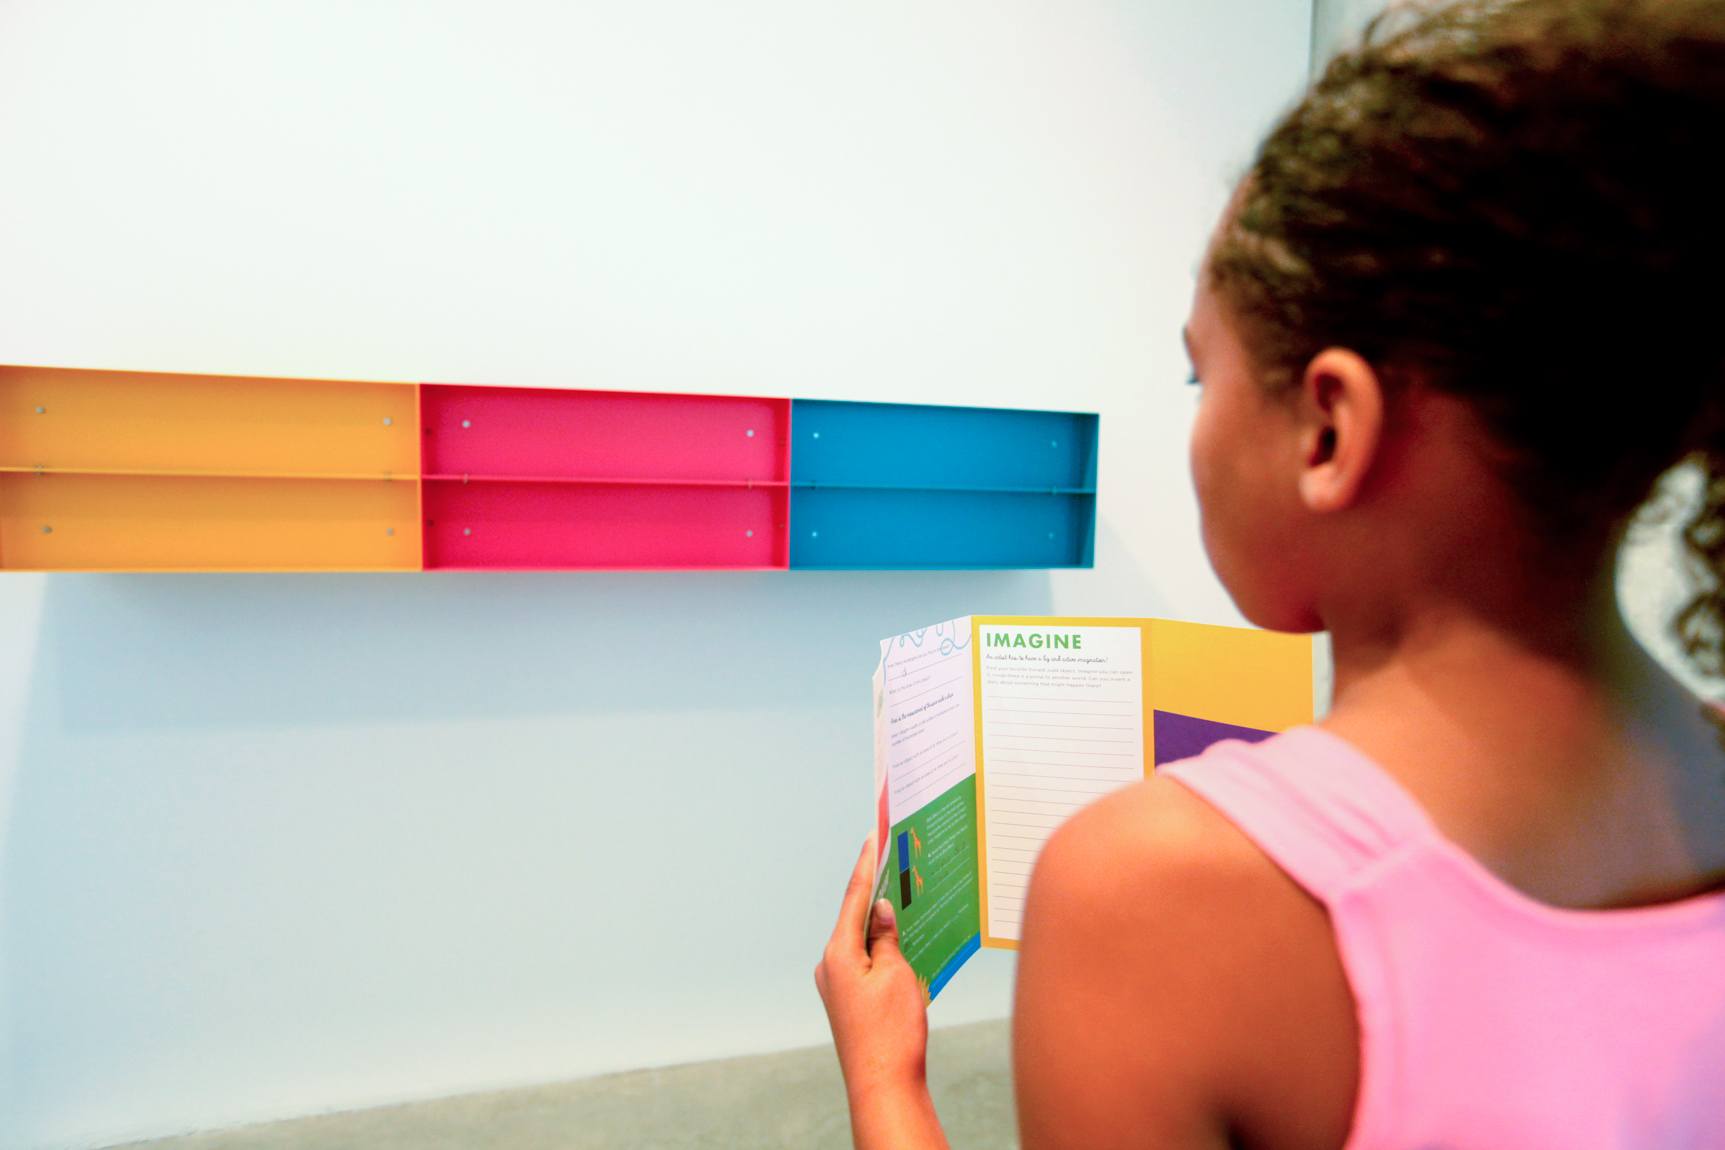 A young visitor views a Donald Judd piece while holding an activity guide.